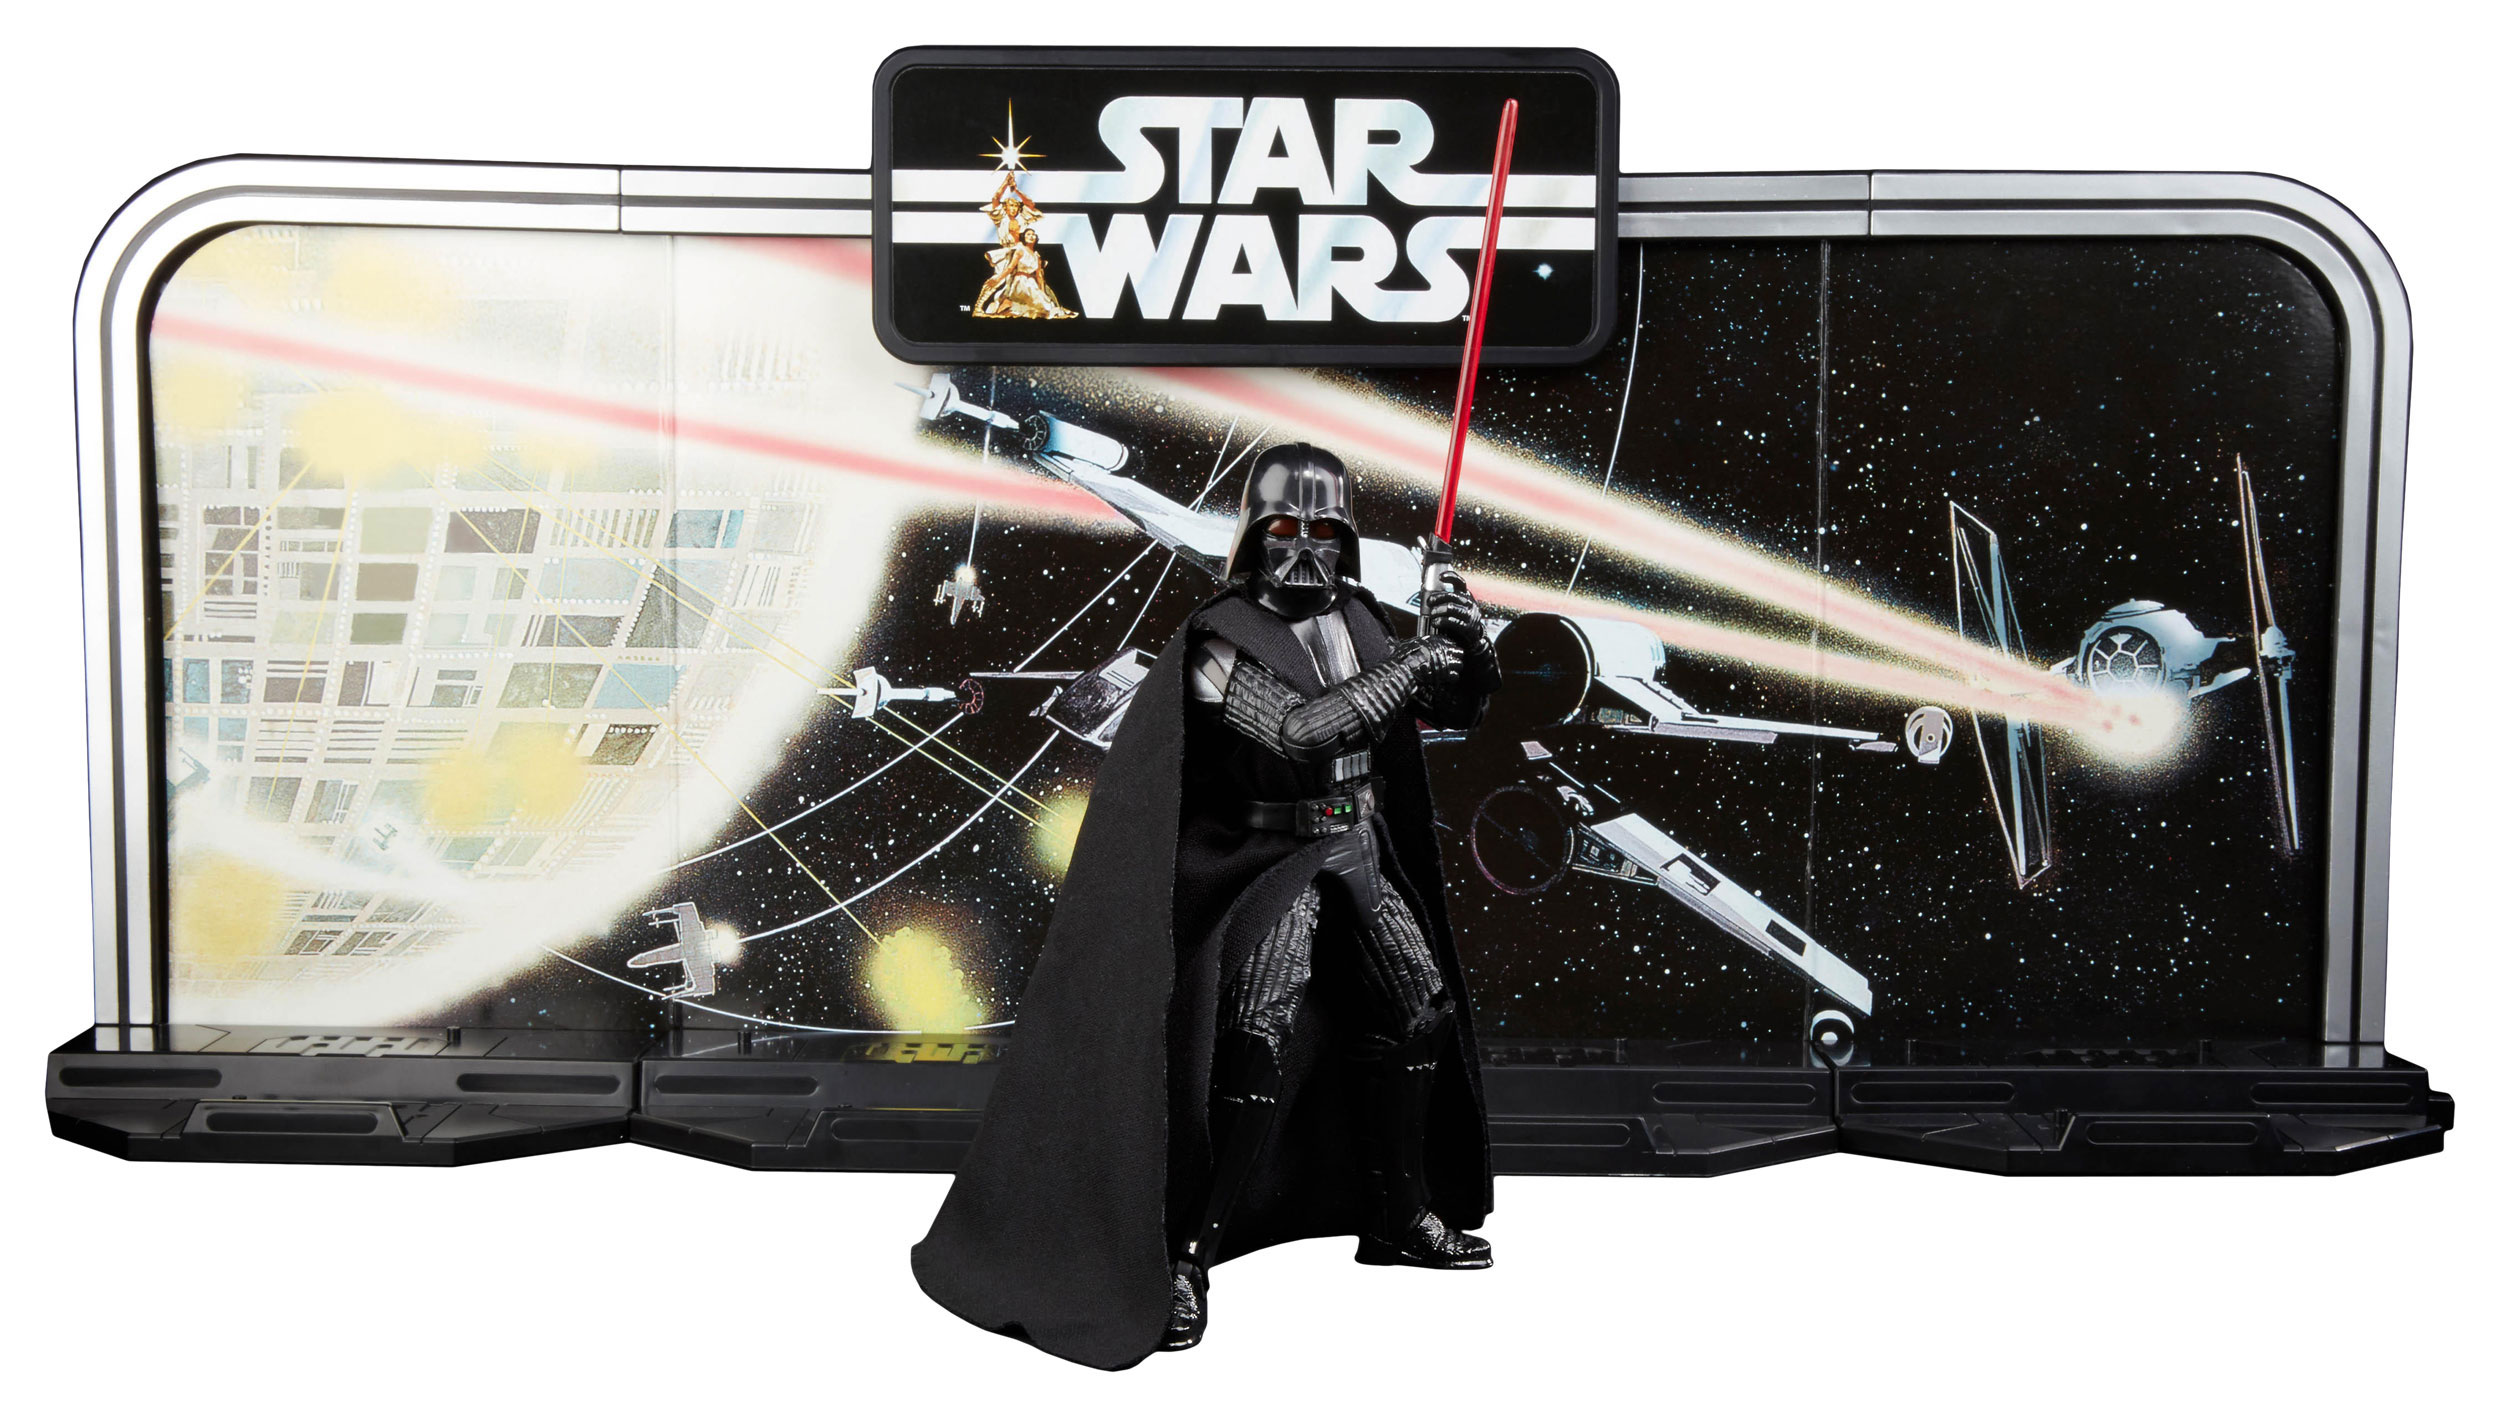 Star Wars The Black Series 40th Anniversary Display Diorama With Darth Vader 6 Inch Action